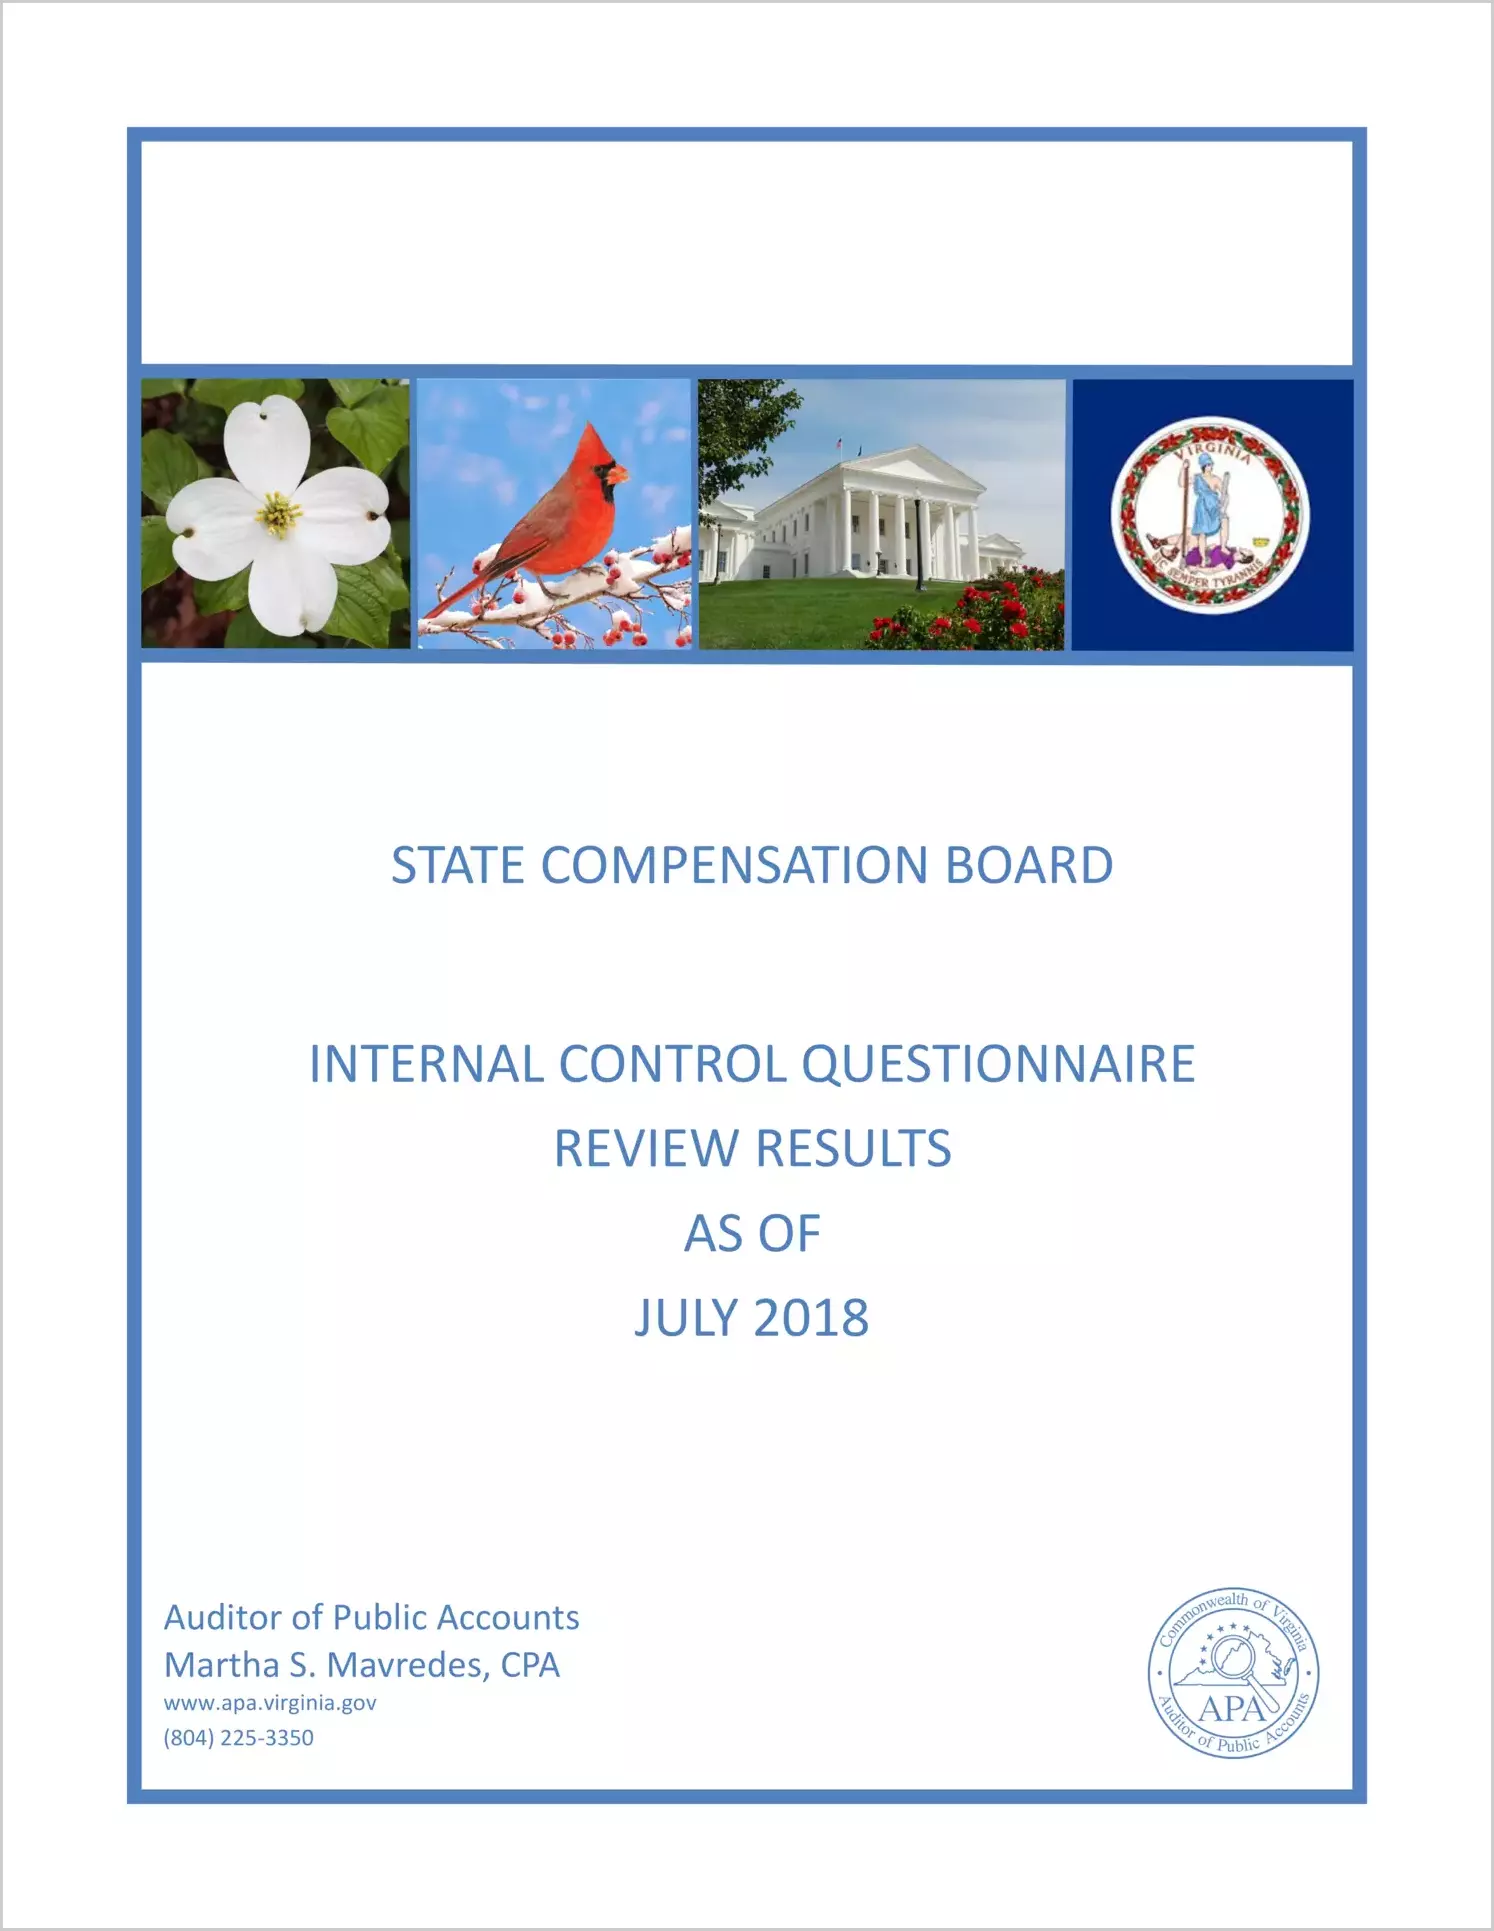 State Compensation Board Internal Control Questionnaire Review Results as of July 2018